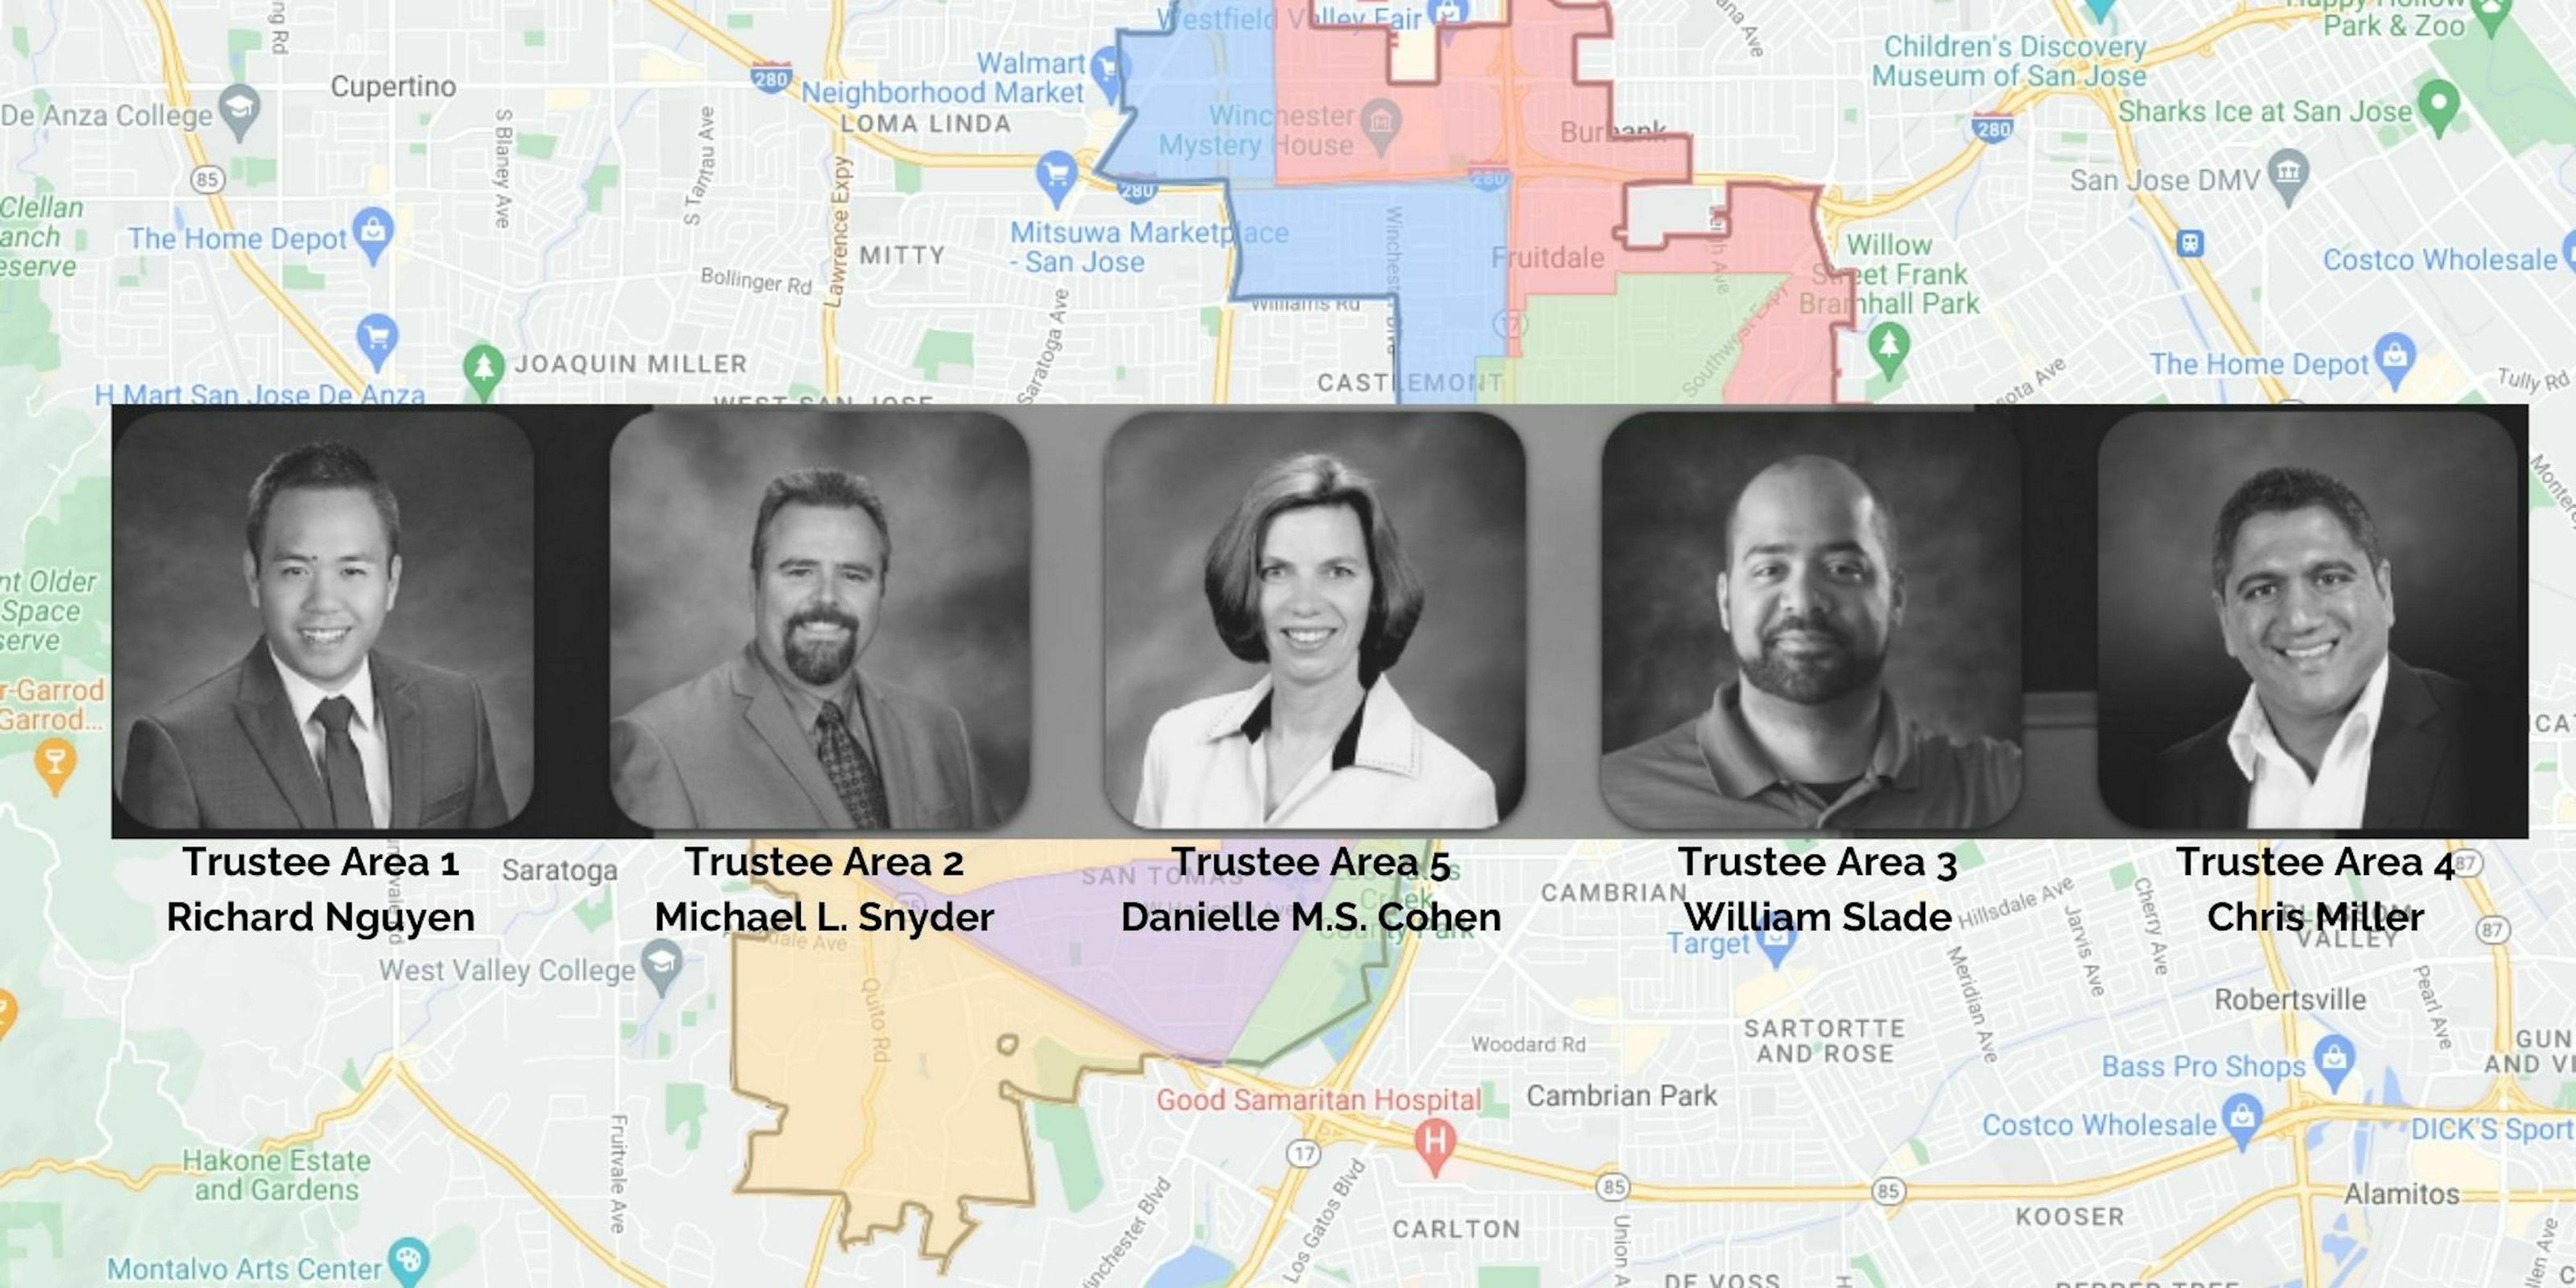 Five head shot photos--one of each board member with name and trustee area—in black and white, and the background is a colorful map of the district boundaries.